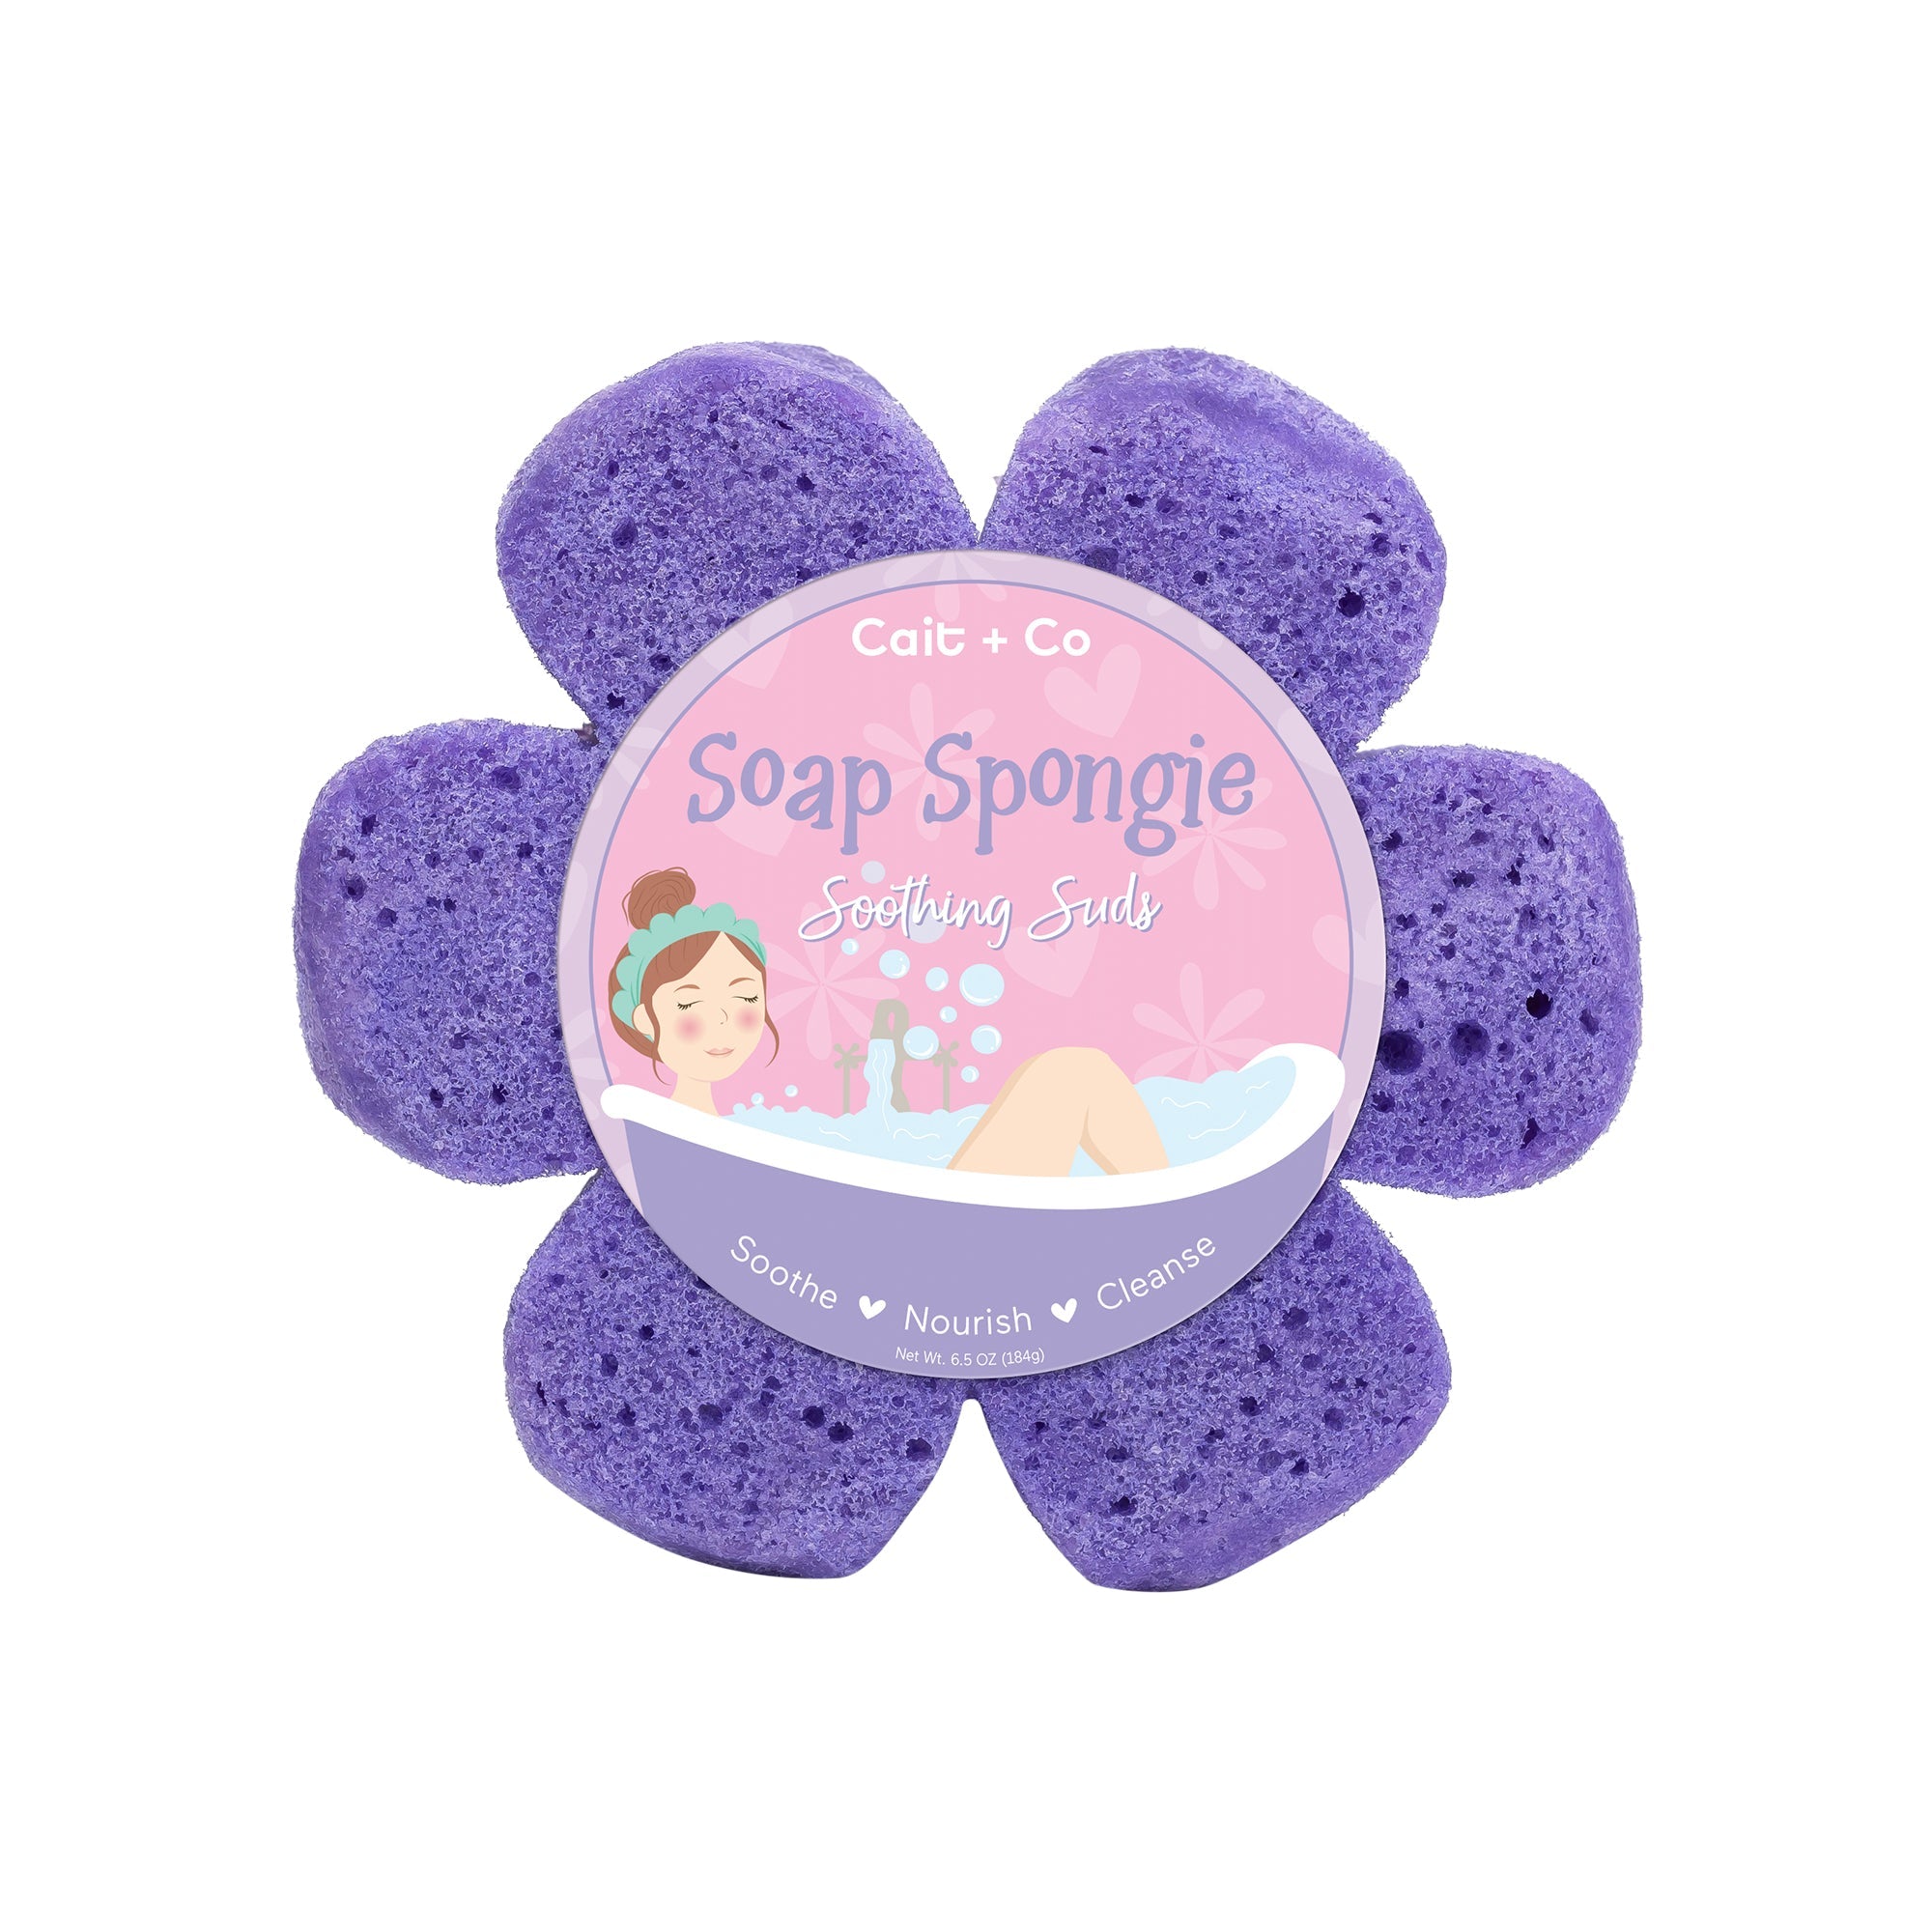 Soap Spongie-Soothing Suds